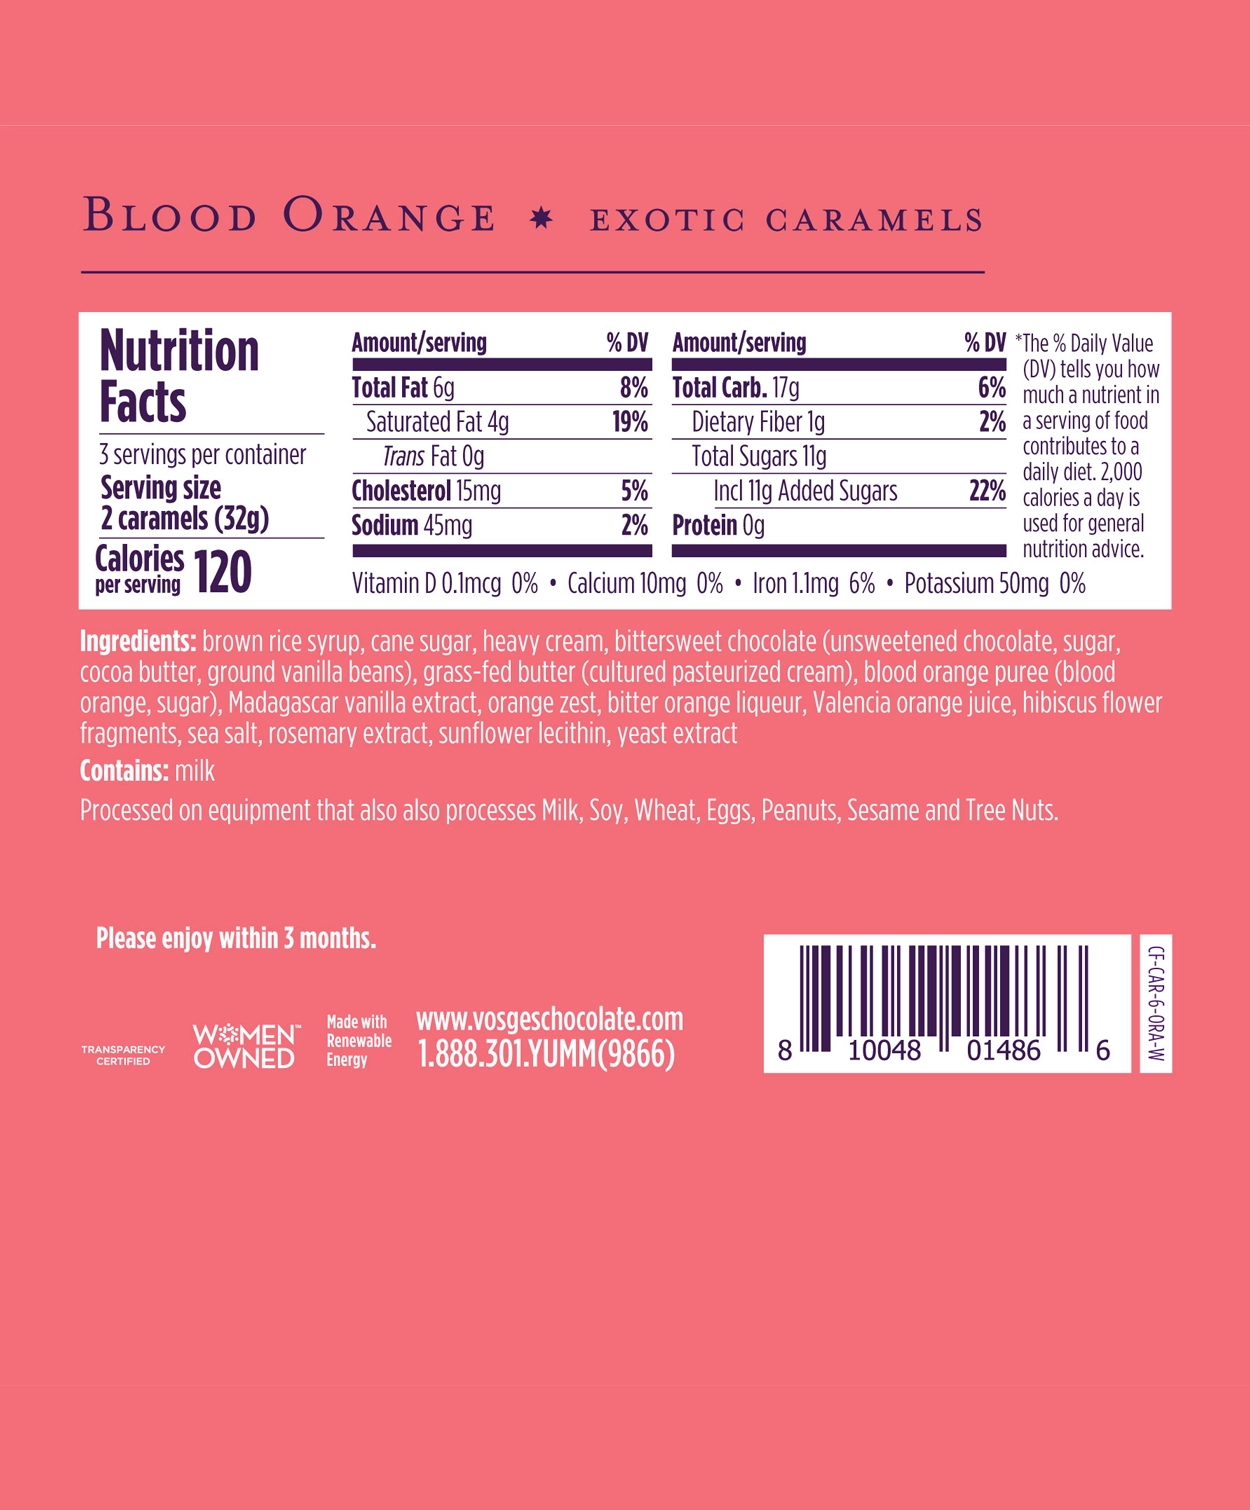 Nutrition Facts and Ingredients of Vosges Haut-Chocolat Blood Orange Exotic Caramels in white, san-serif font on a bright pink background.